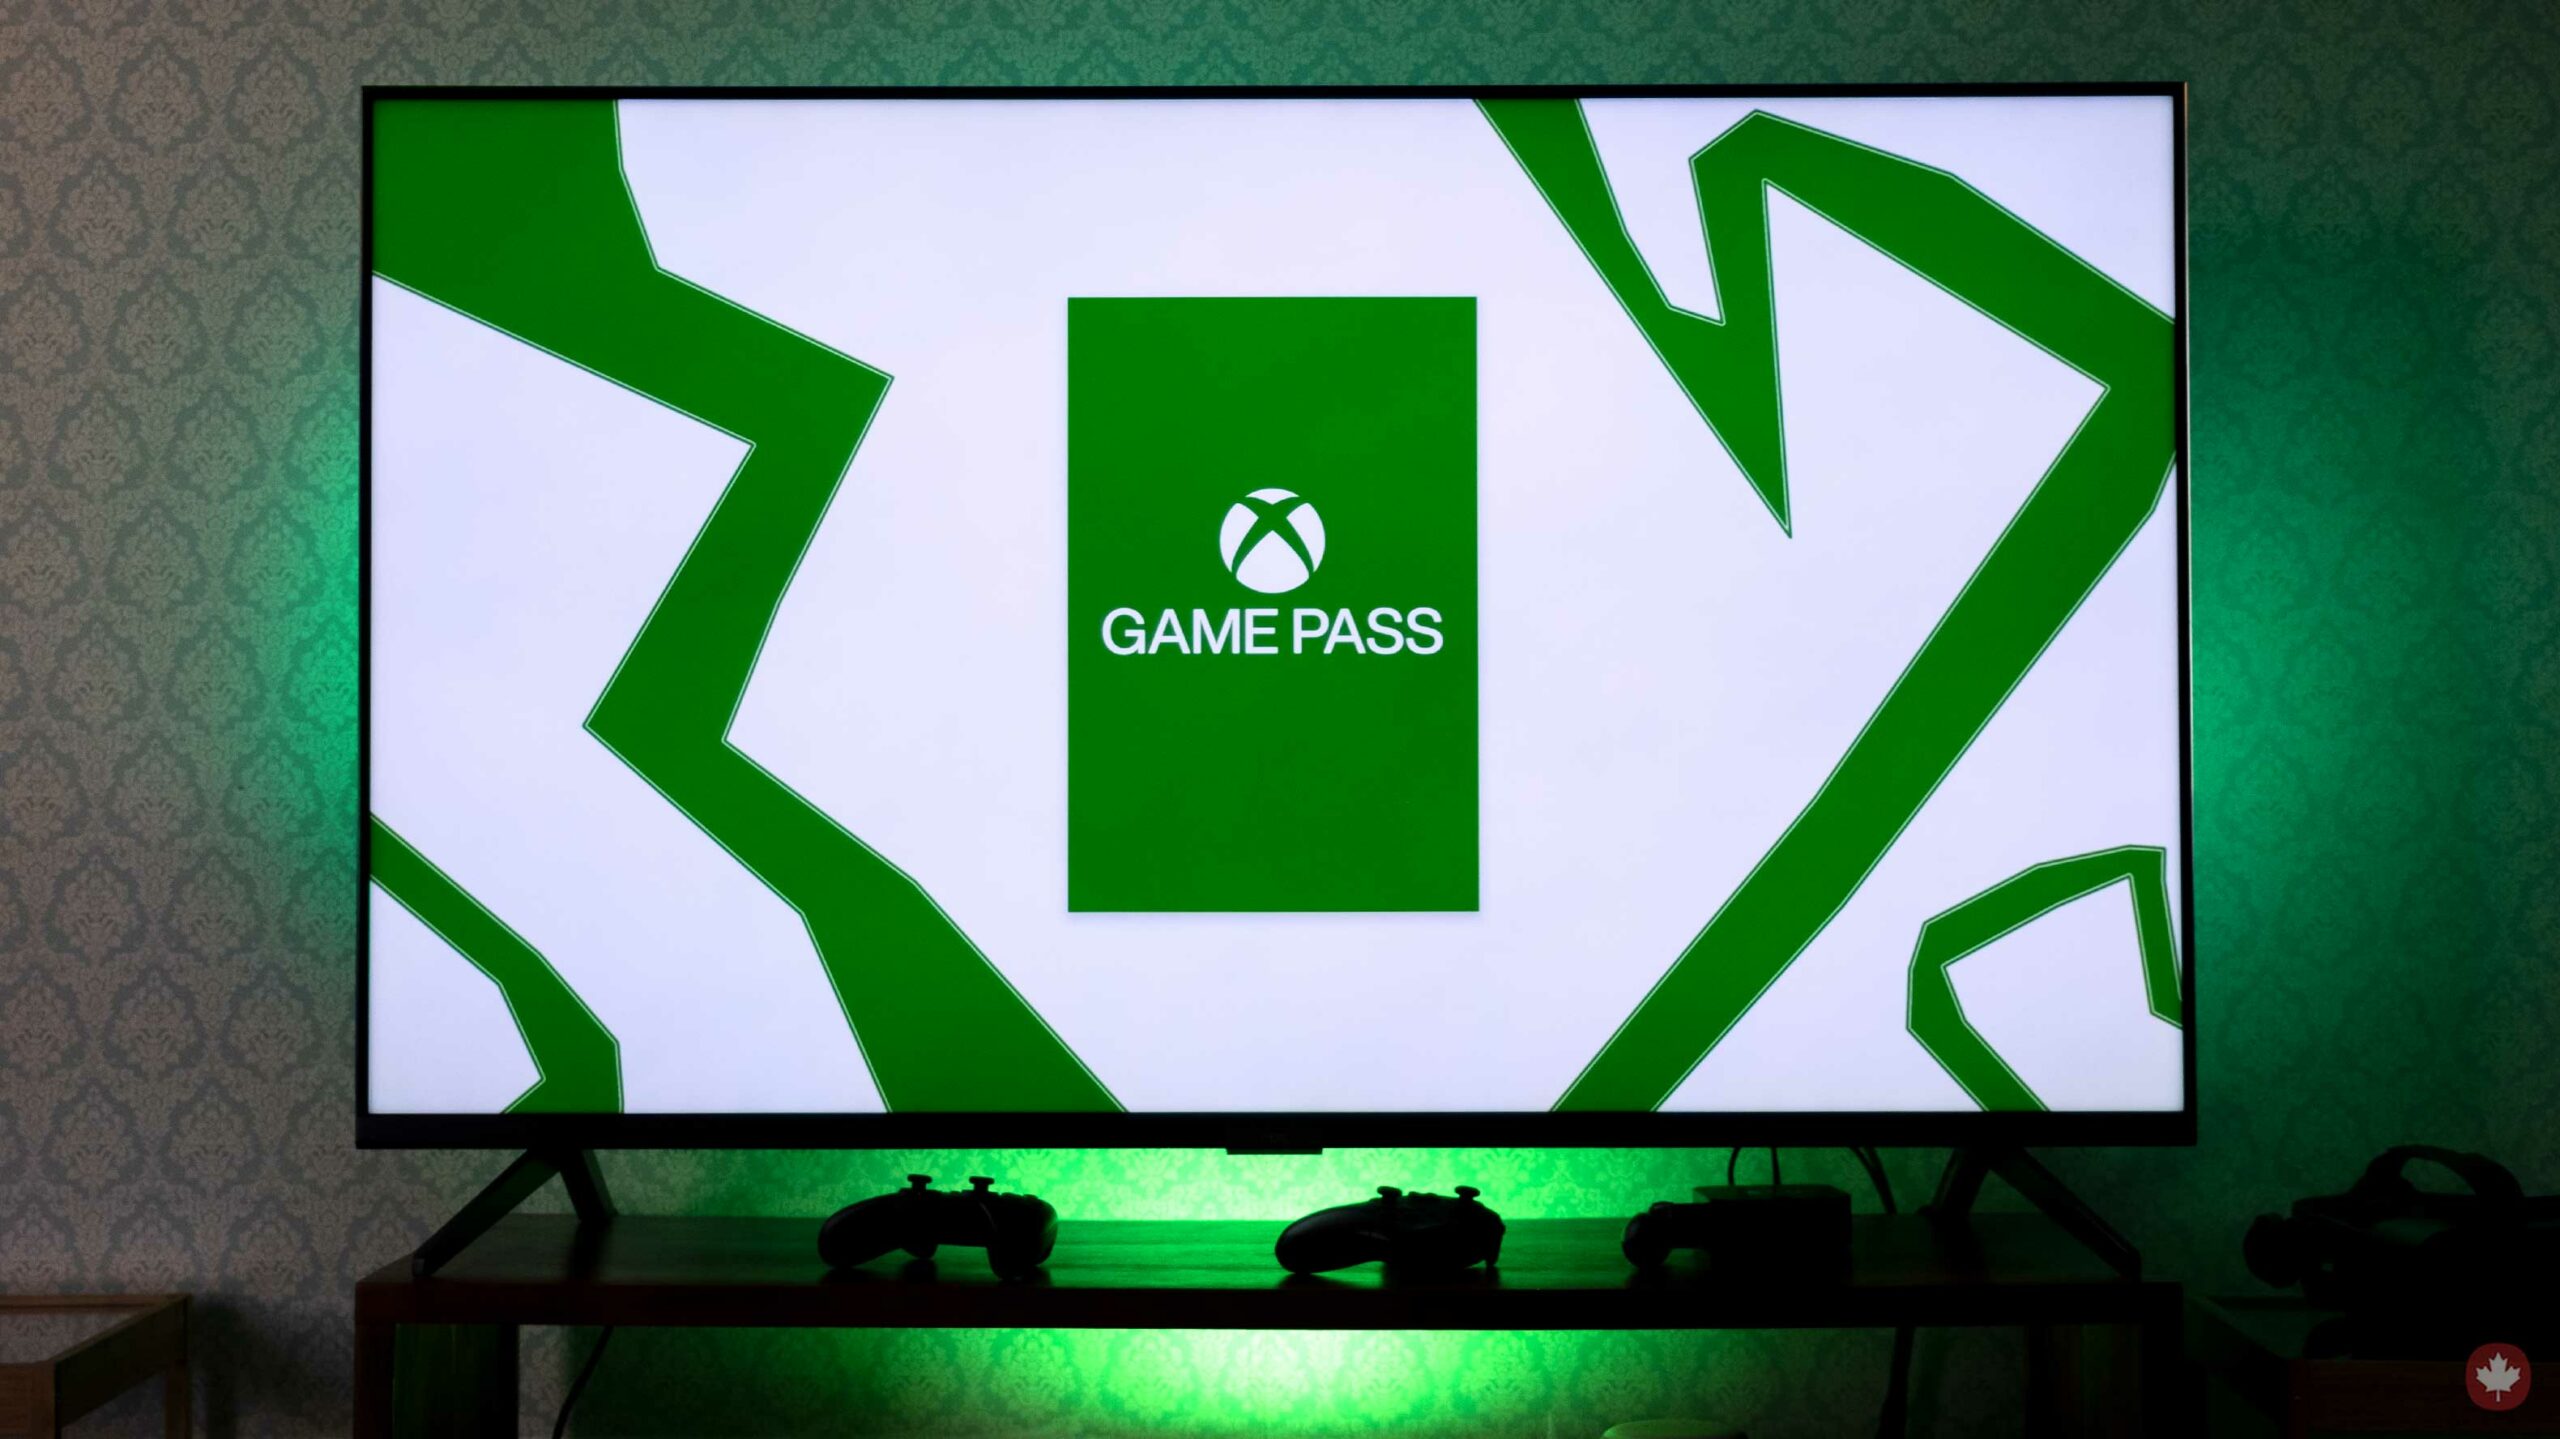 Xbox confirms it's working on streaming devices, TV apps for Cloud